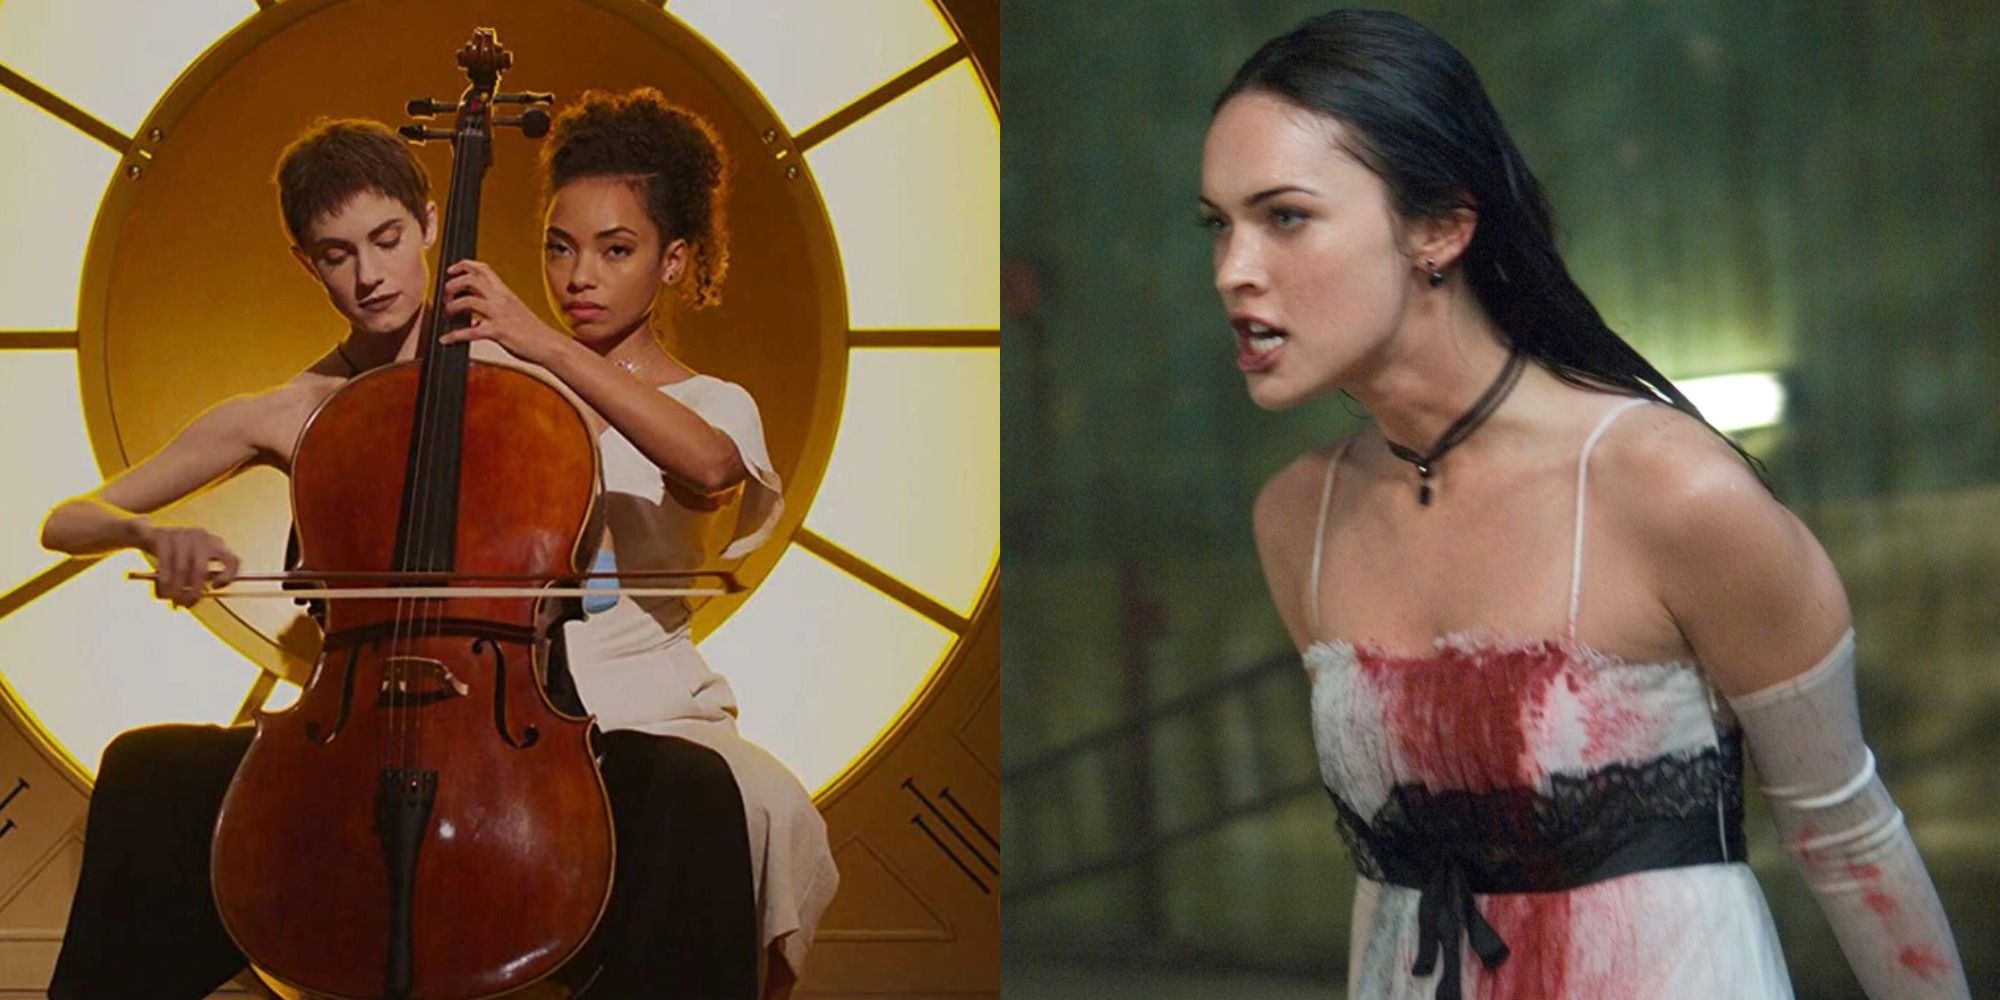 Split image showing scenes from The Perfection and Jennifer's Body